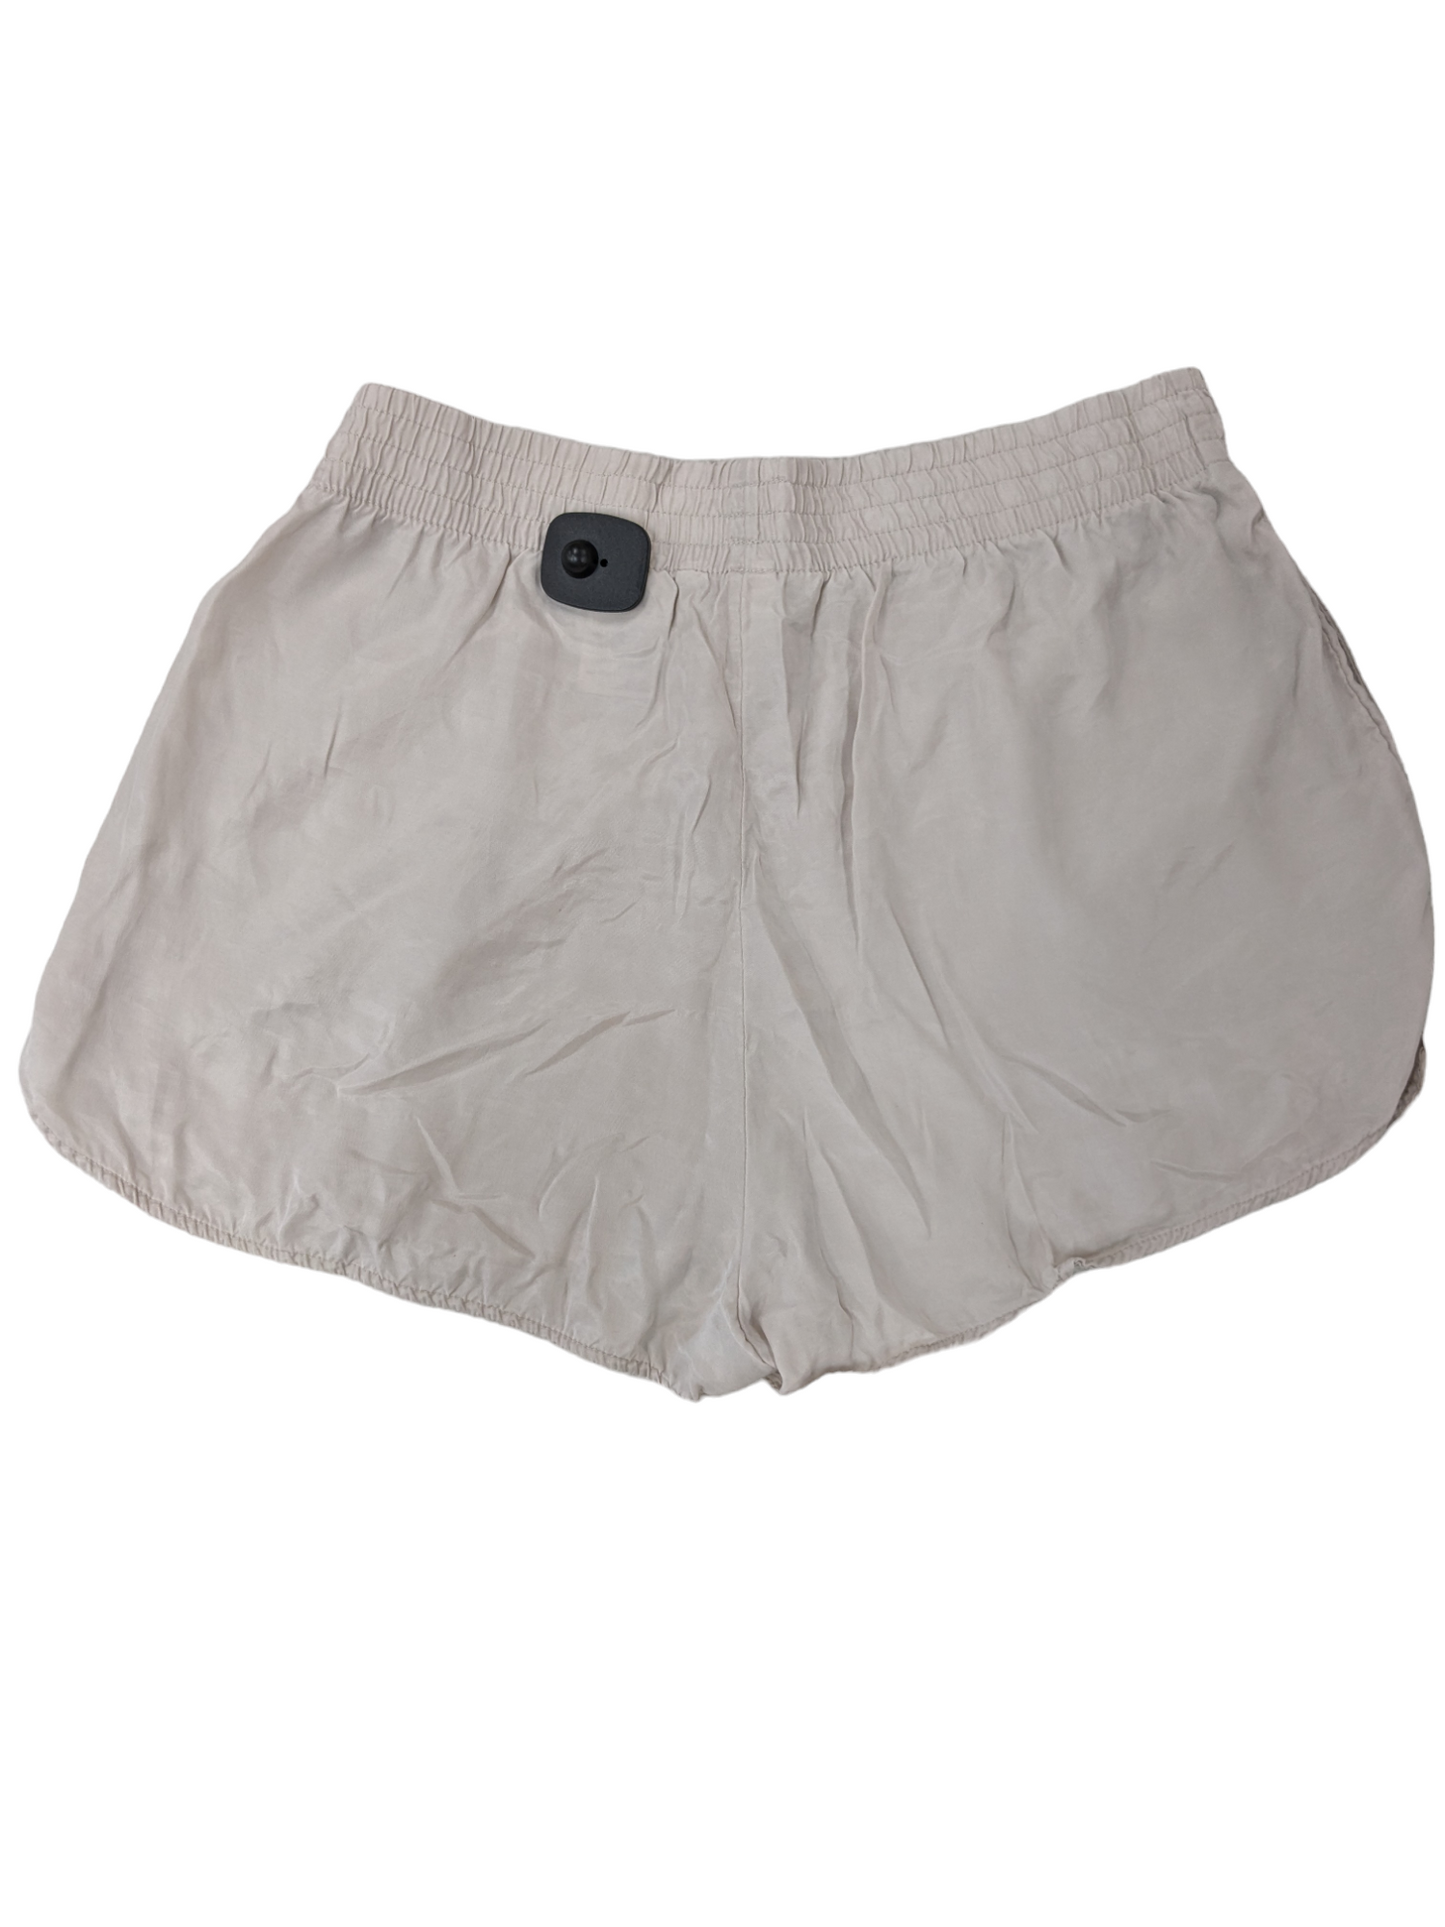 Taupe Shorts H&m, Size L